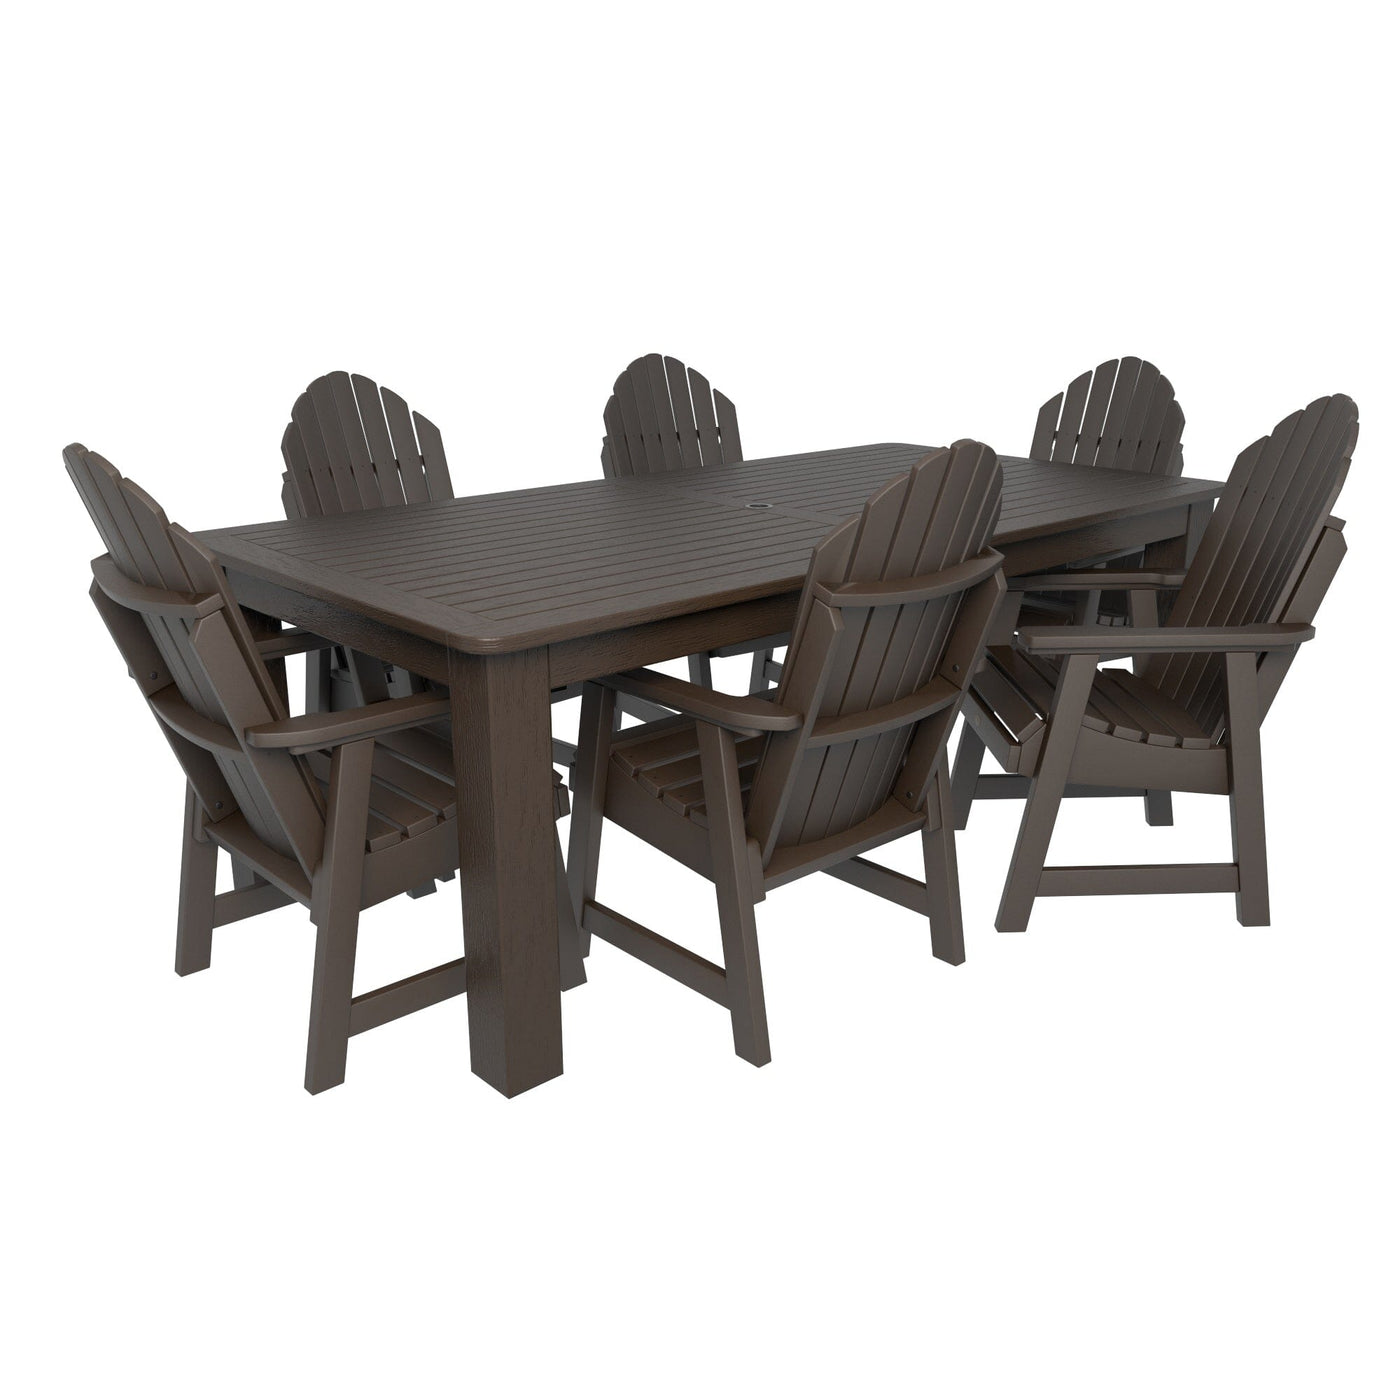 Hamilton 7pc Rectangular Outdoor Dining Set 42in x 84in - Dining Height Dining Highwood USA Weathered Acorn 